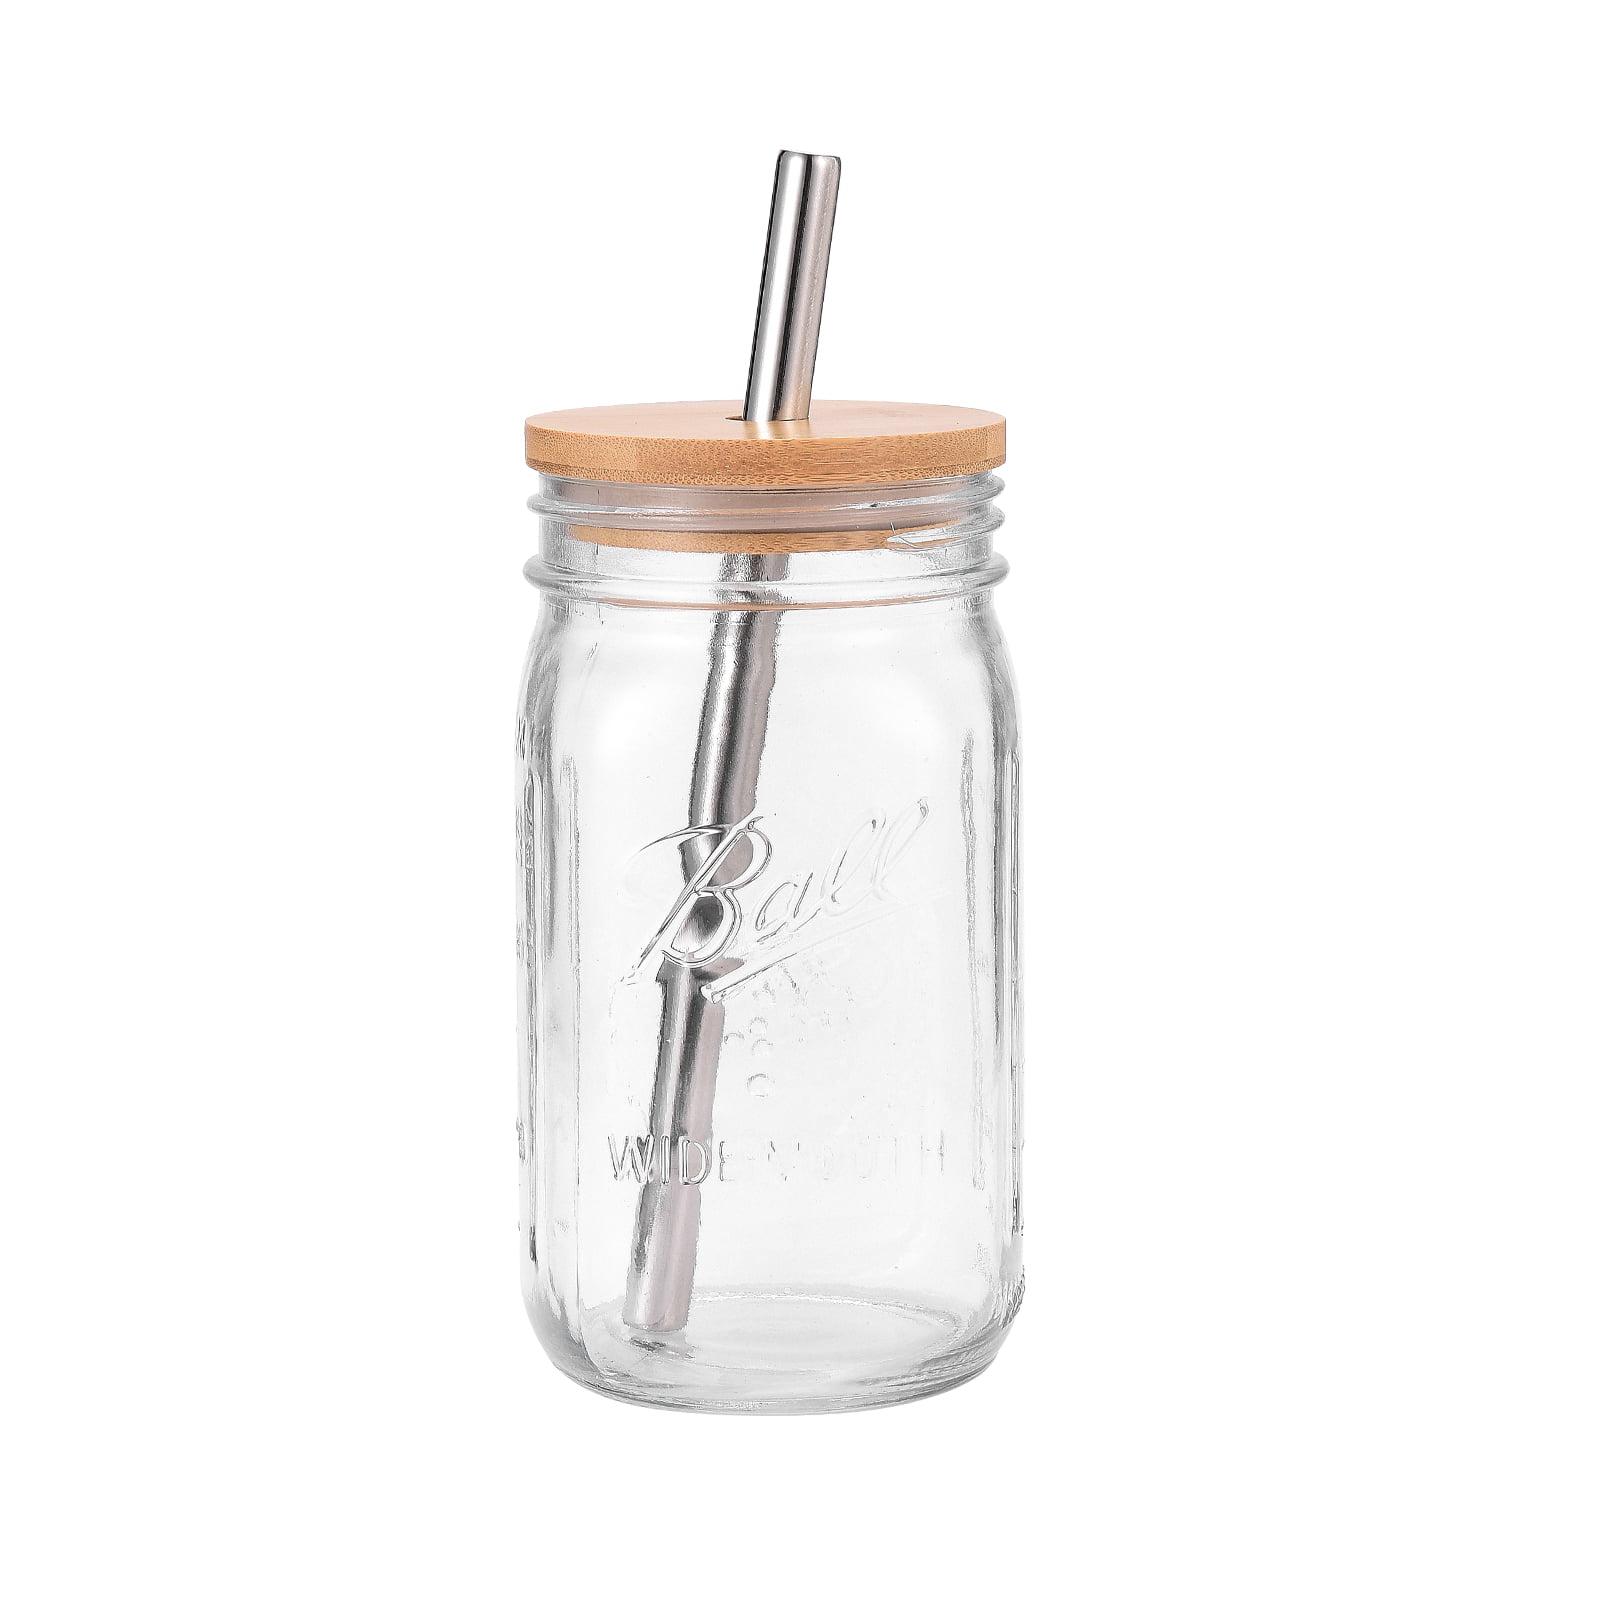 Bamboo Drink Lids for Mason Jars – Onekea Bros. General Store